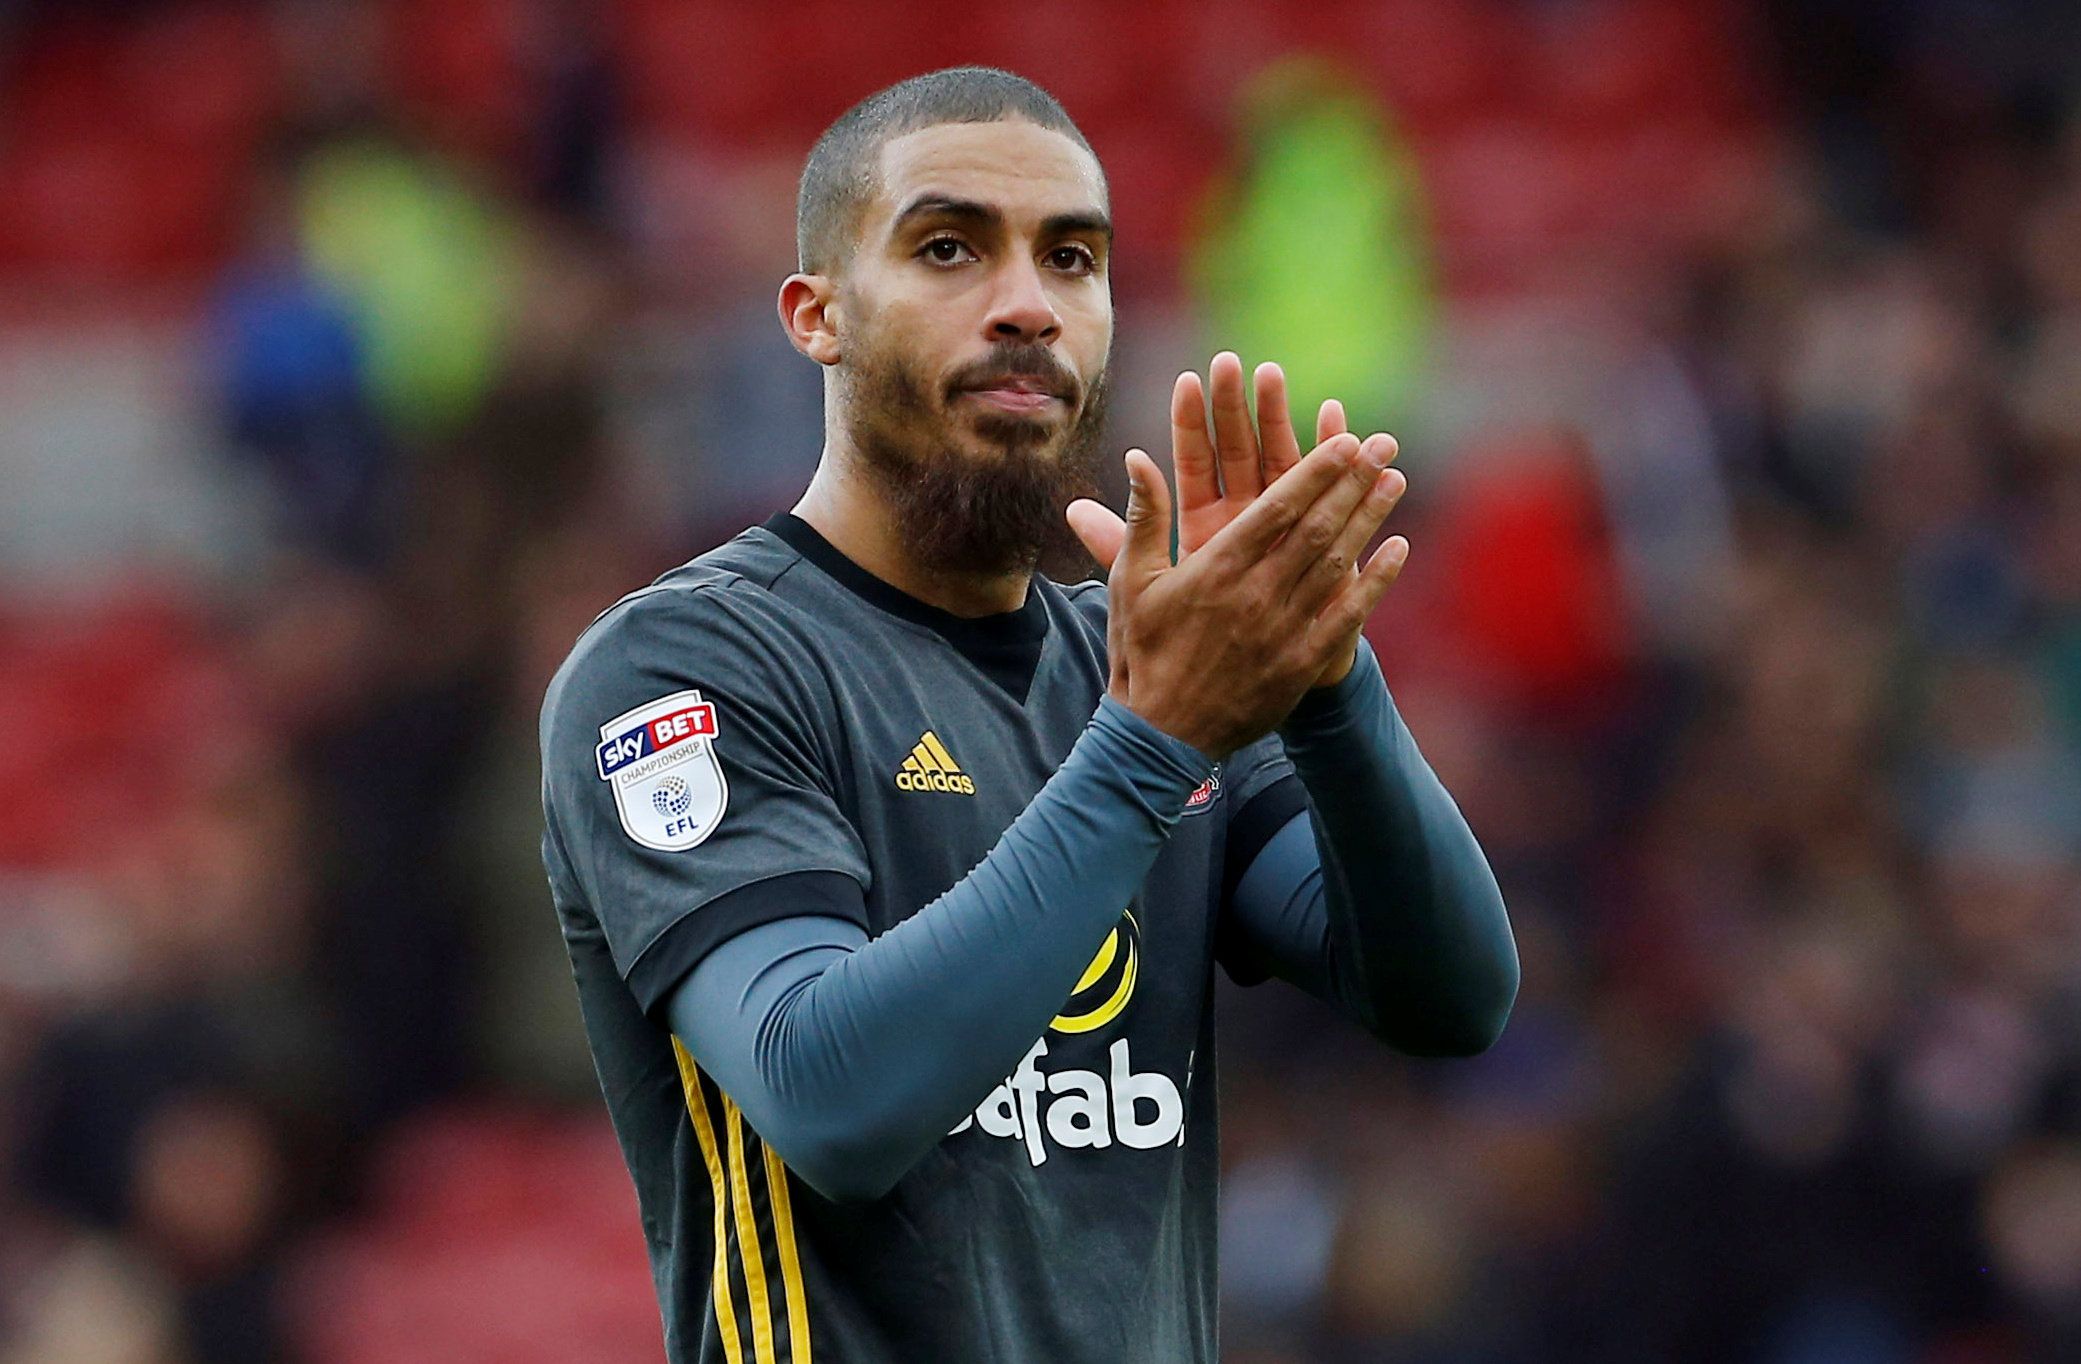 Soccer Football - Championship - Middlesbrough vs Sunderland - Riverside Stadium, Middlesbrough, Britain - November 5, 2017   Sunderland's Lewis Grabban applauds the fans after the match   Action Images/Craig Brough  EDITORIAL USE ONLY. No use with unauthorized audio, video, data, fixture lists, club/league logos or 